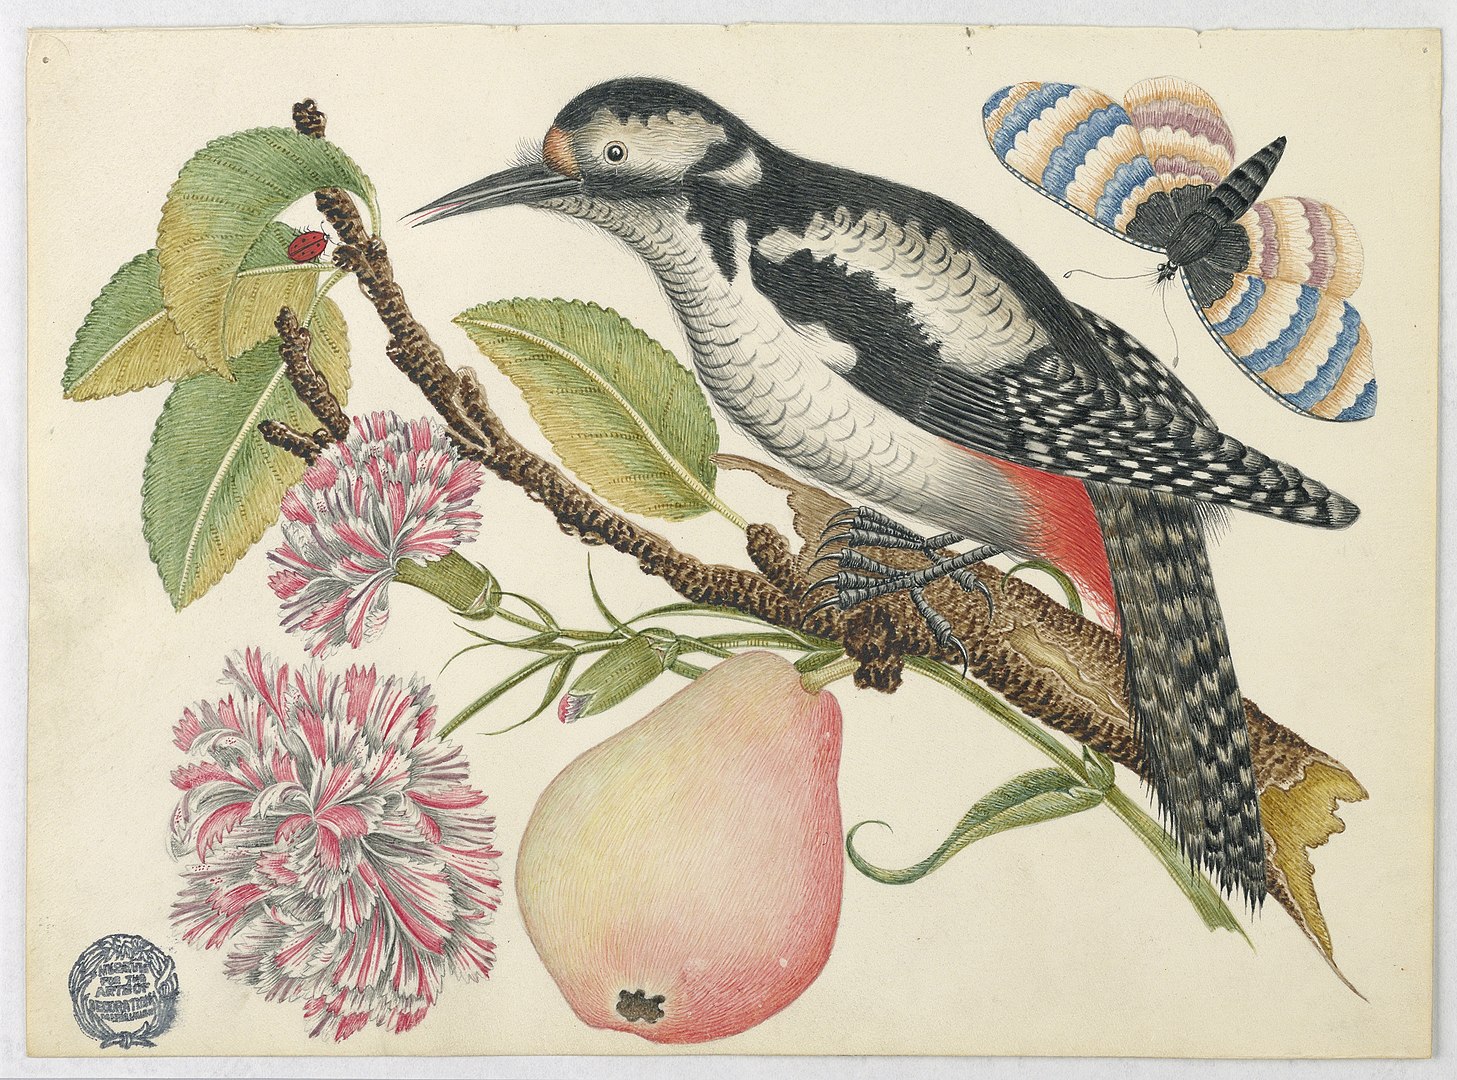 A bird perched on a branch which bears flowers, leaves, and a pear with a butterfly in the upper-right corner